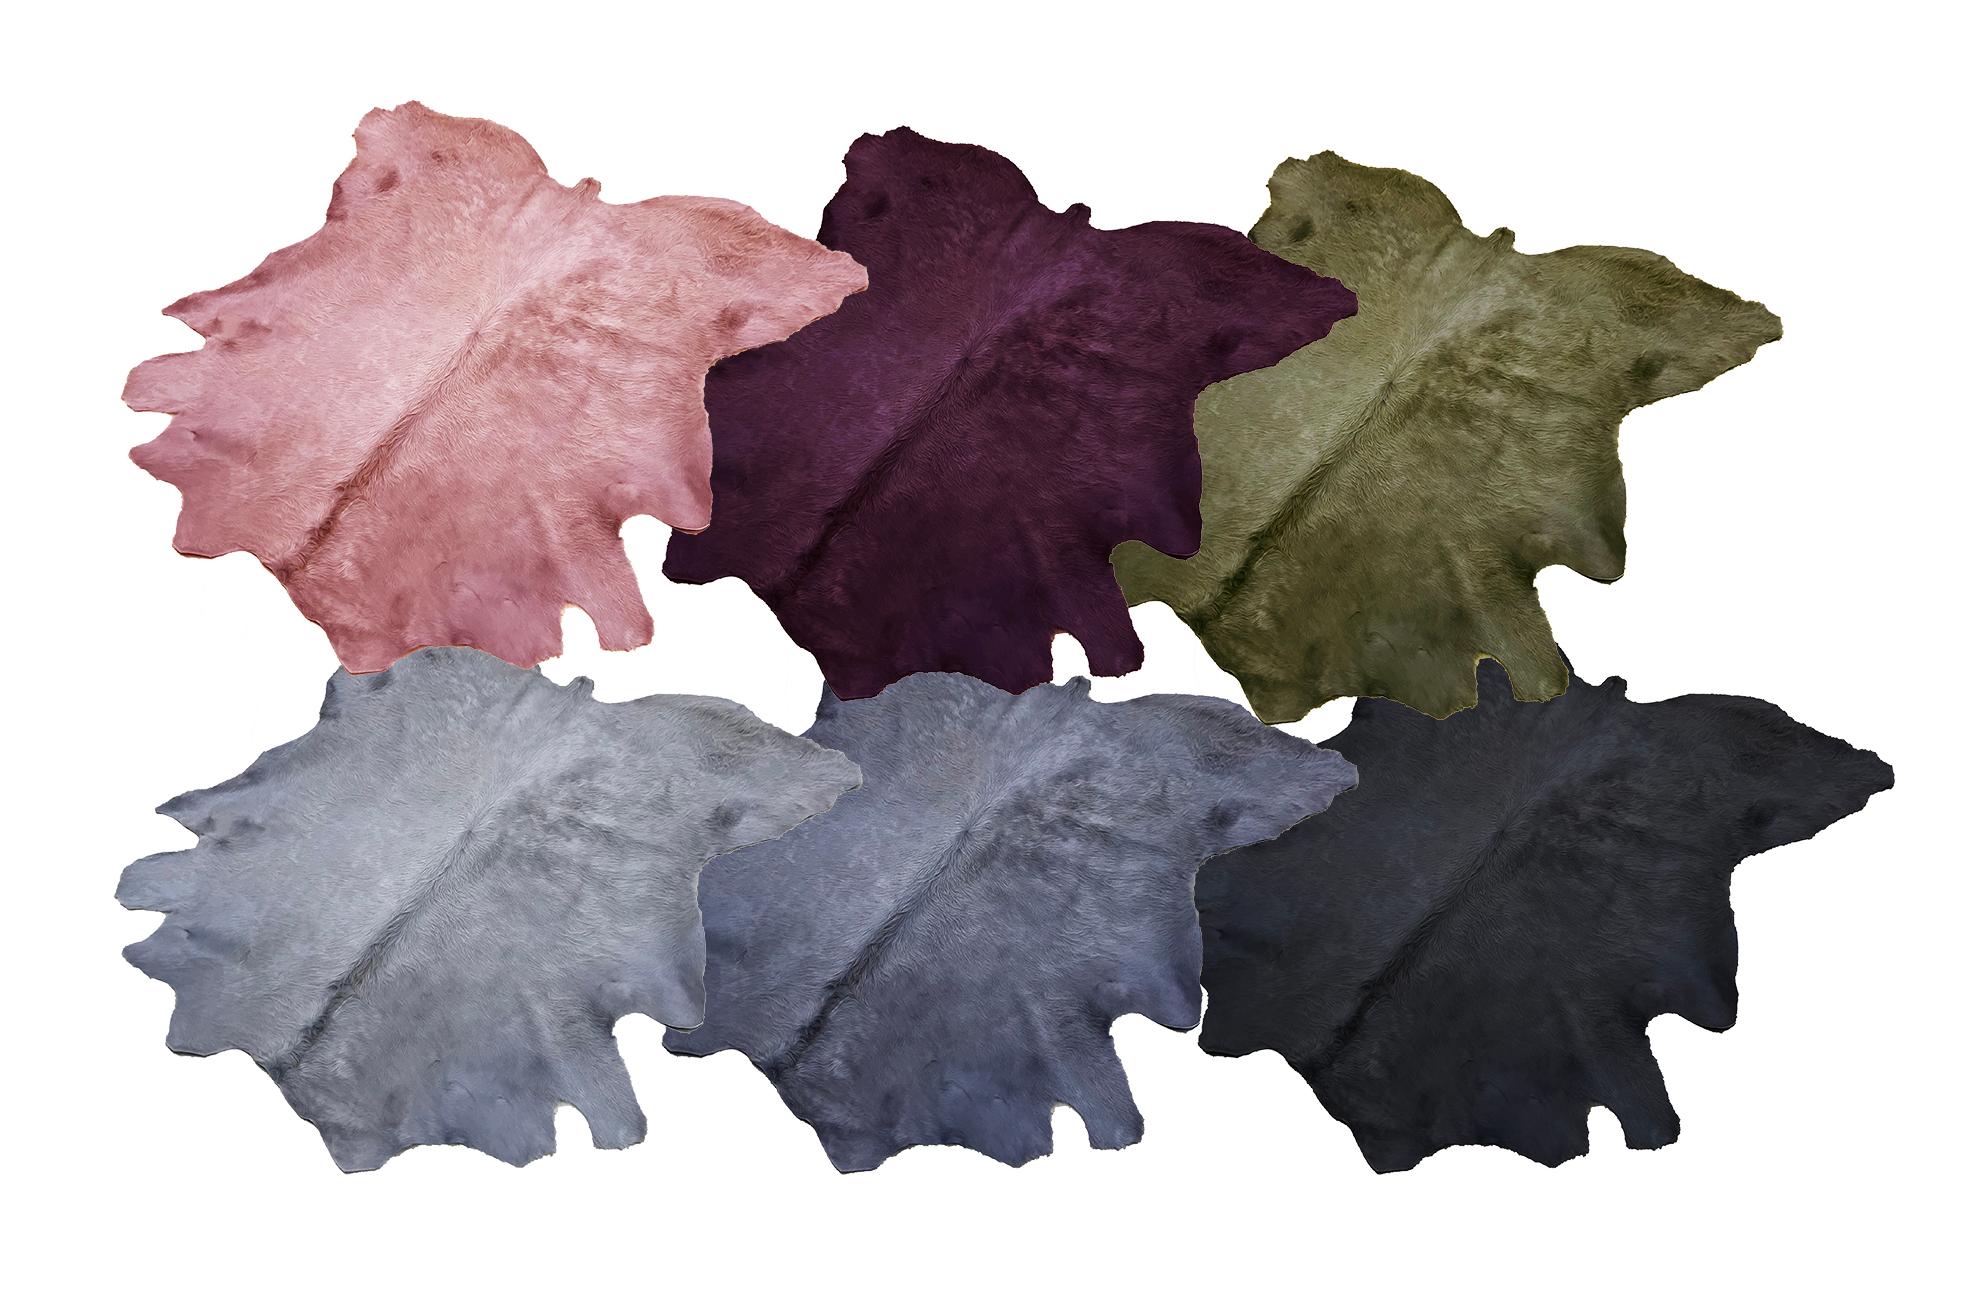 Contemporary Cowhide Rug, Burgundy, Hand Dyed, Sustainably Sourced, Variety of Colors For Sale